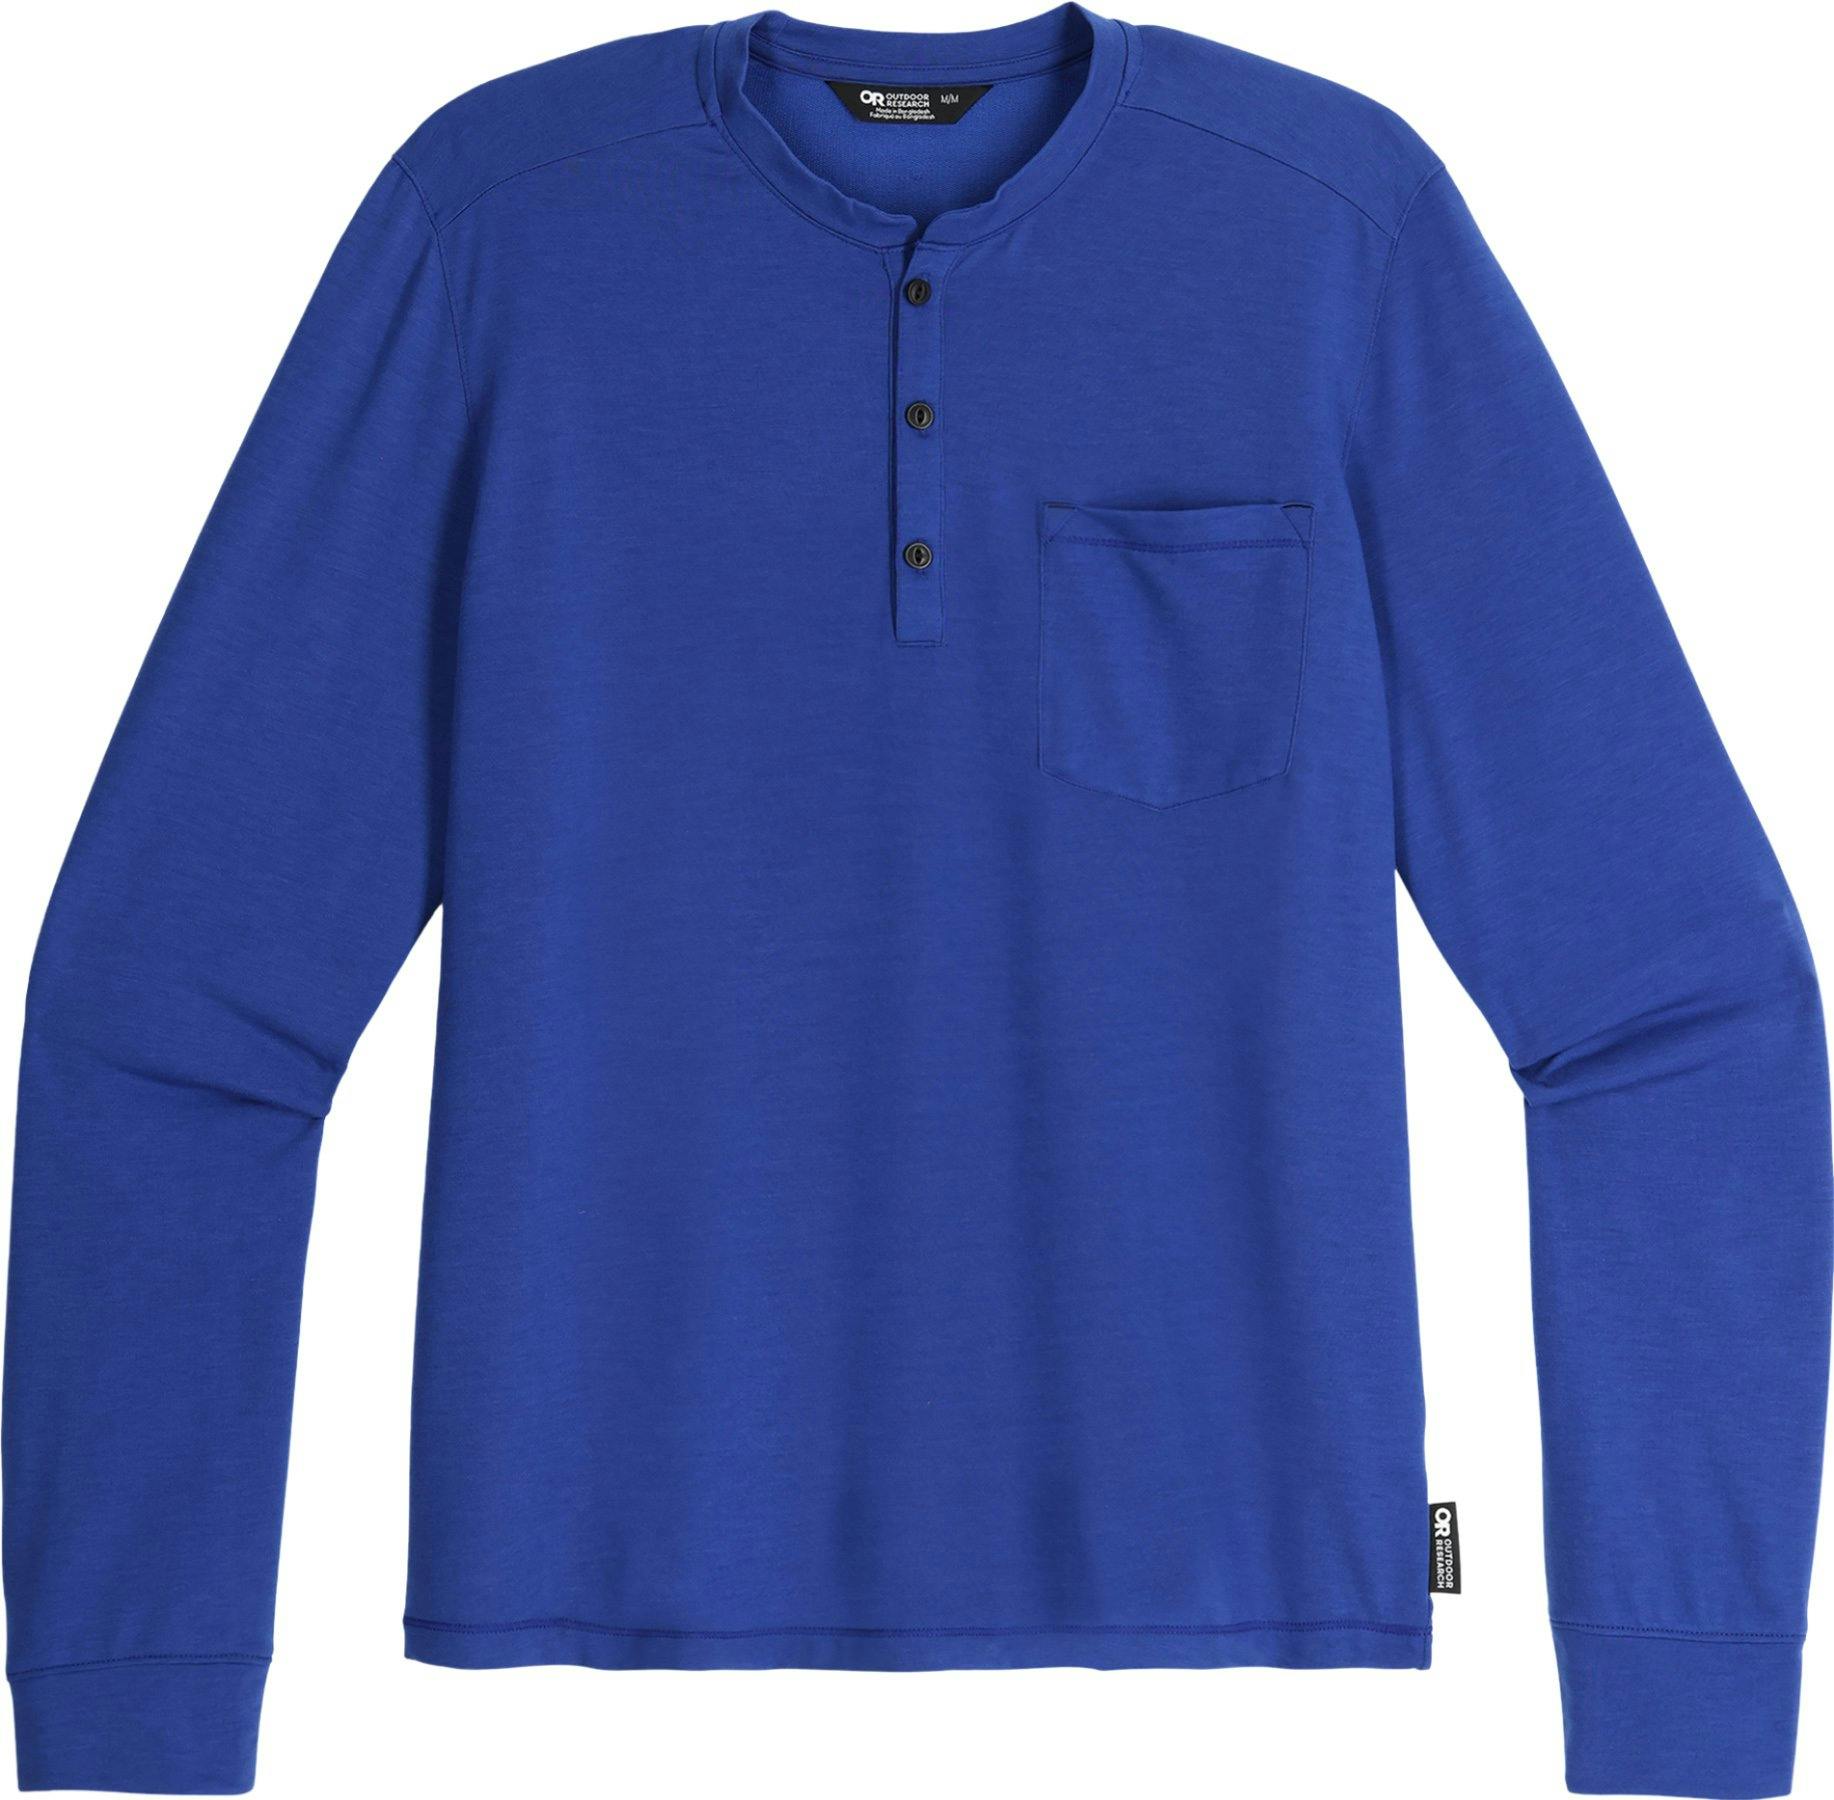 Product image for Aberdeen L/S Henley - Men's